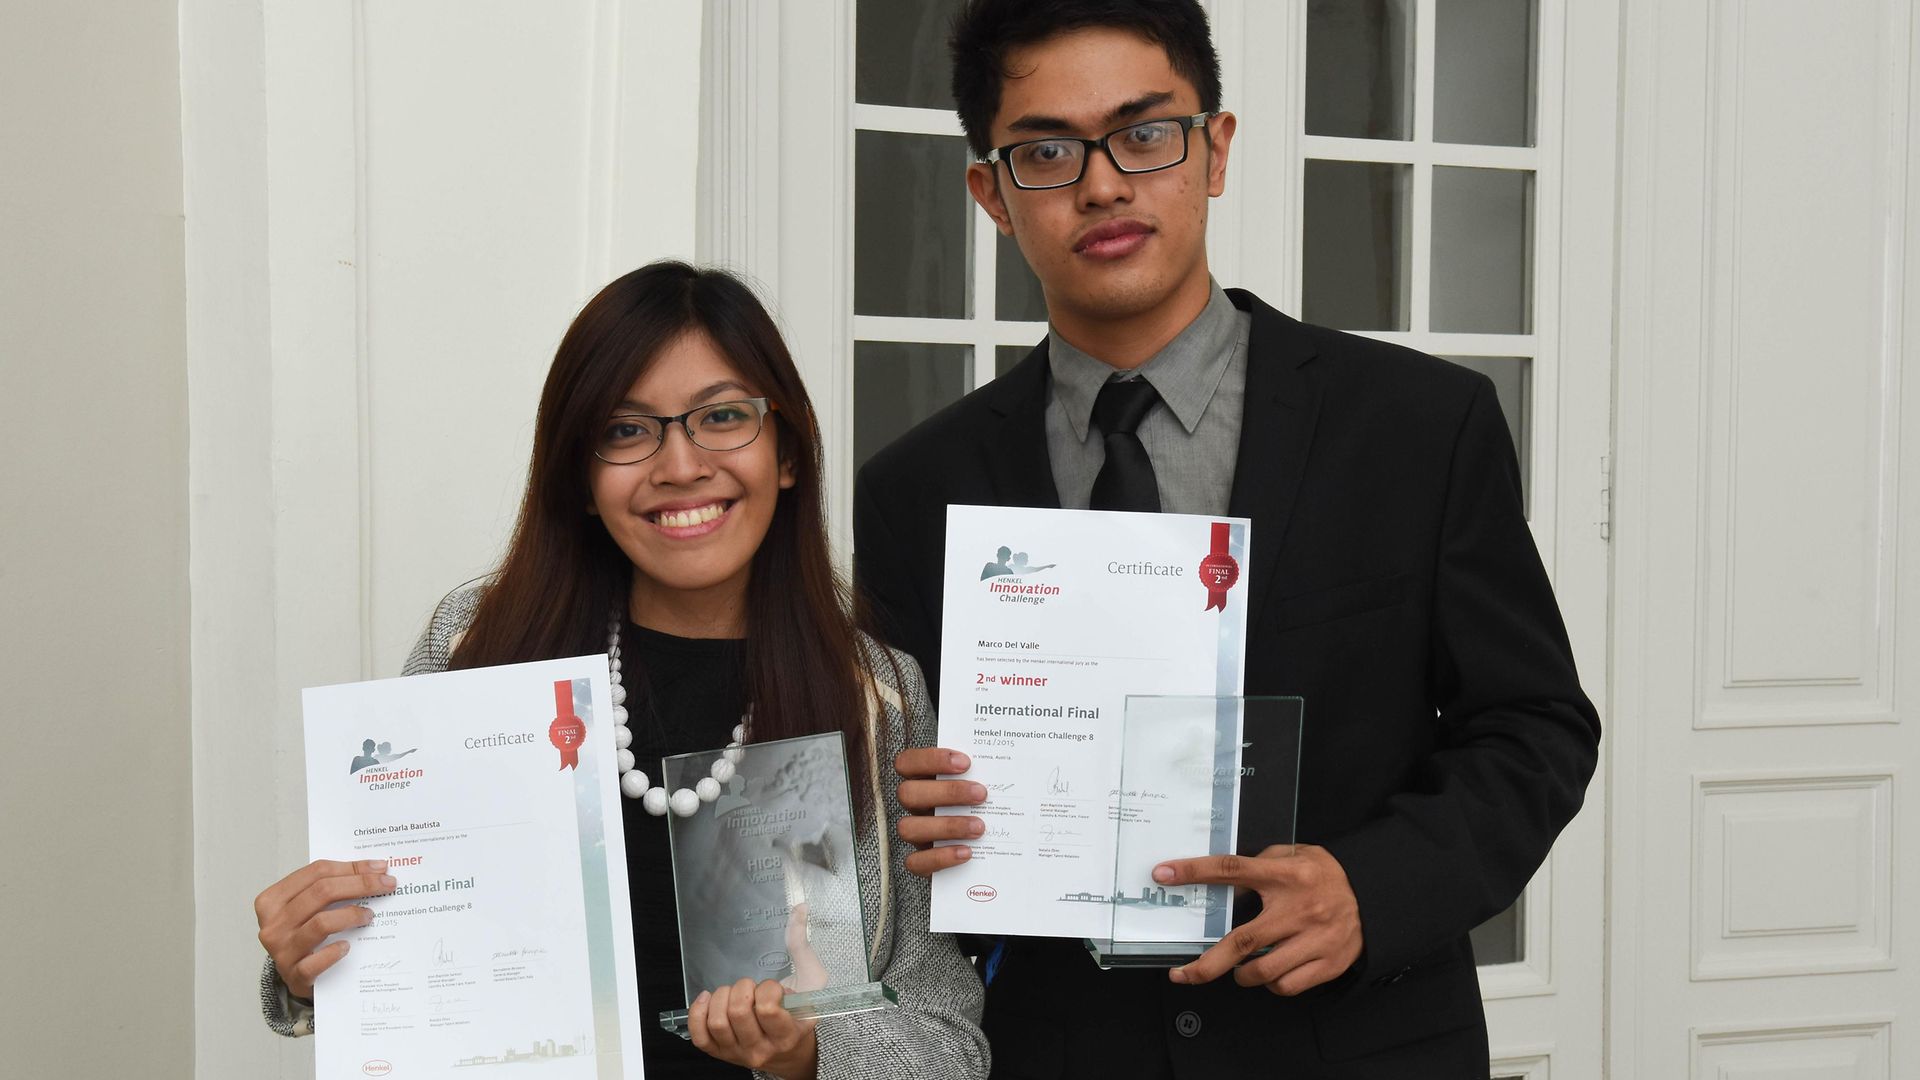 The team from the Philippines, Christine Darla Bautista and Marco del Valle, won the second prize 